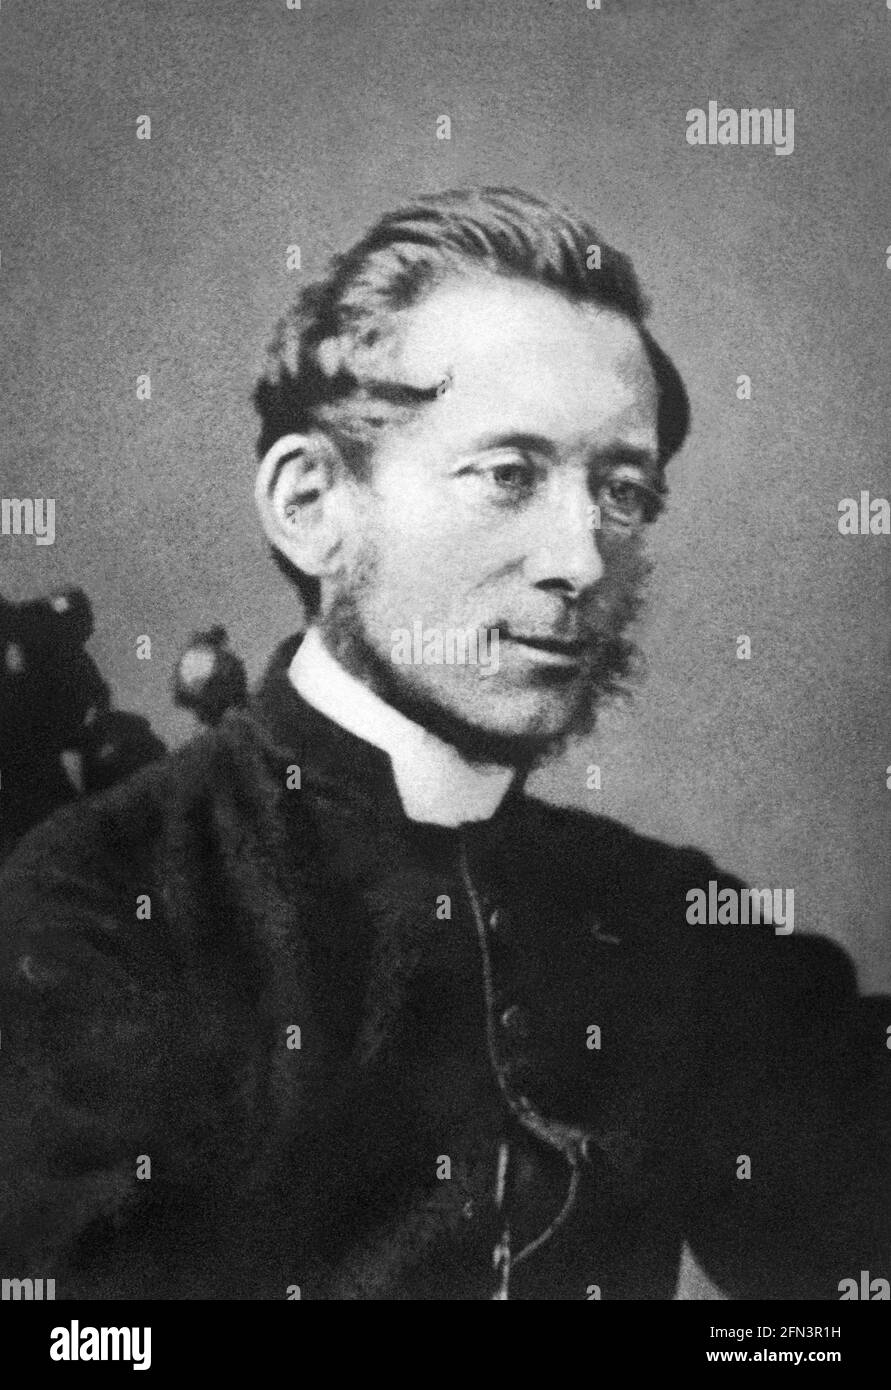 John Bacchus Dykes (1823-1876), English clergyman and hymnwriter remembered for about 300 hymn tunes, including 'Holy, Holy, Holy,' 'All Hail the Power of Jesus' Name,' 'Nearer My God to Thee,' 'Rock of Ages,' and 'O for a Thousand Tongues.' Stock Photo